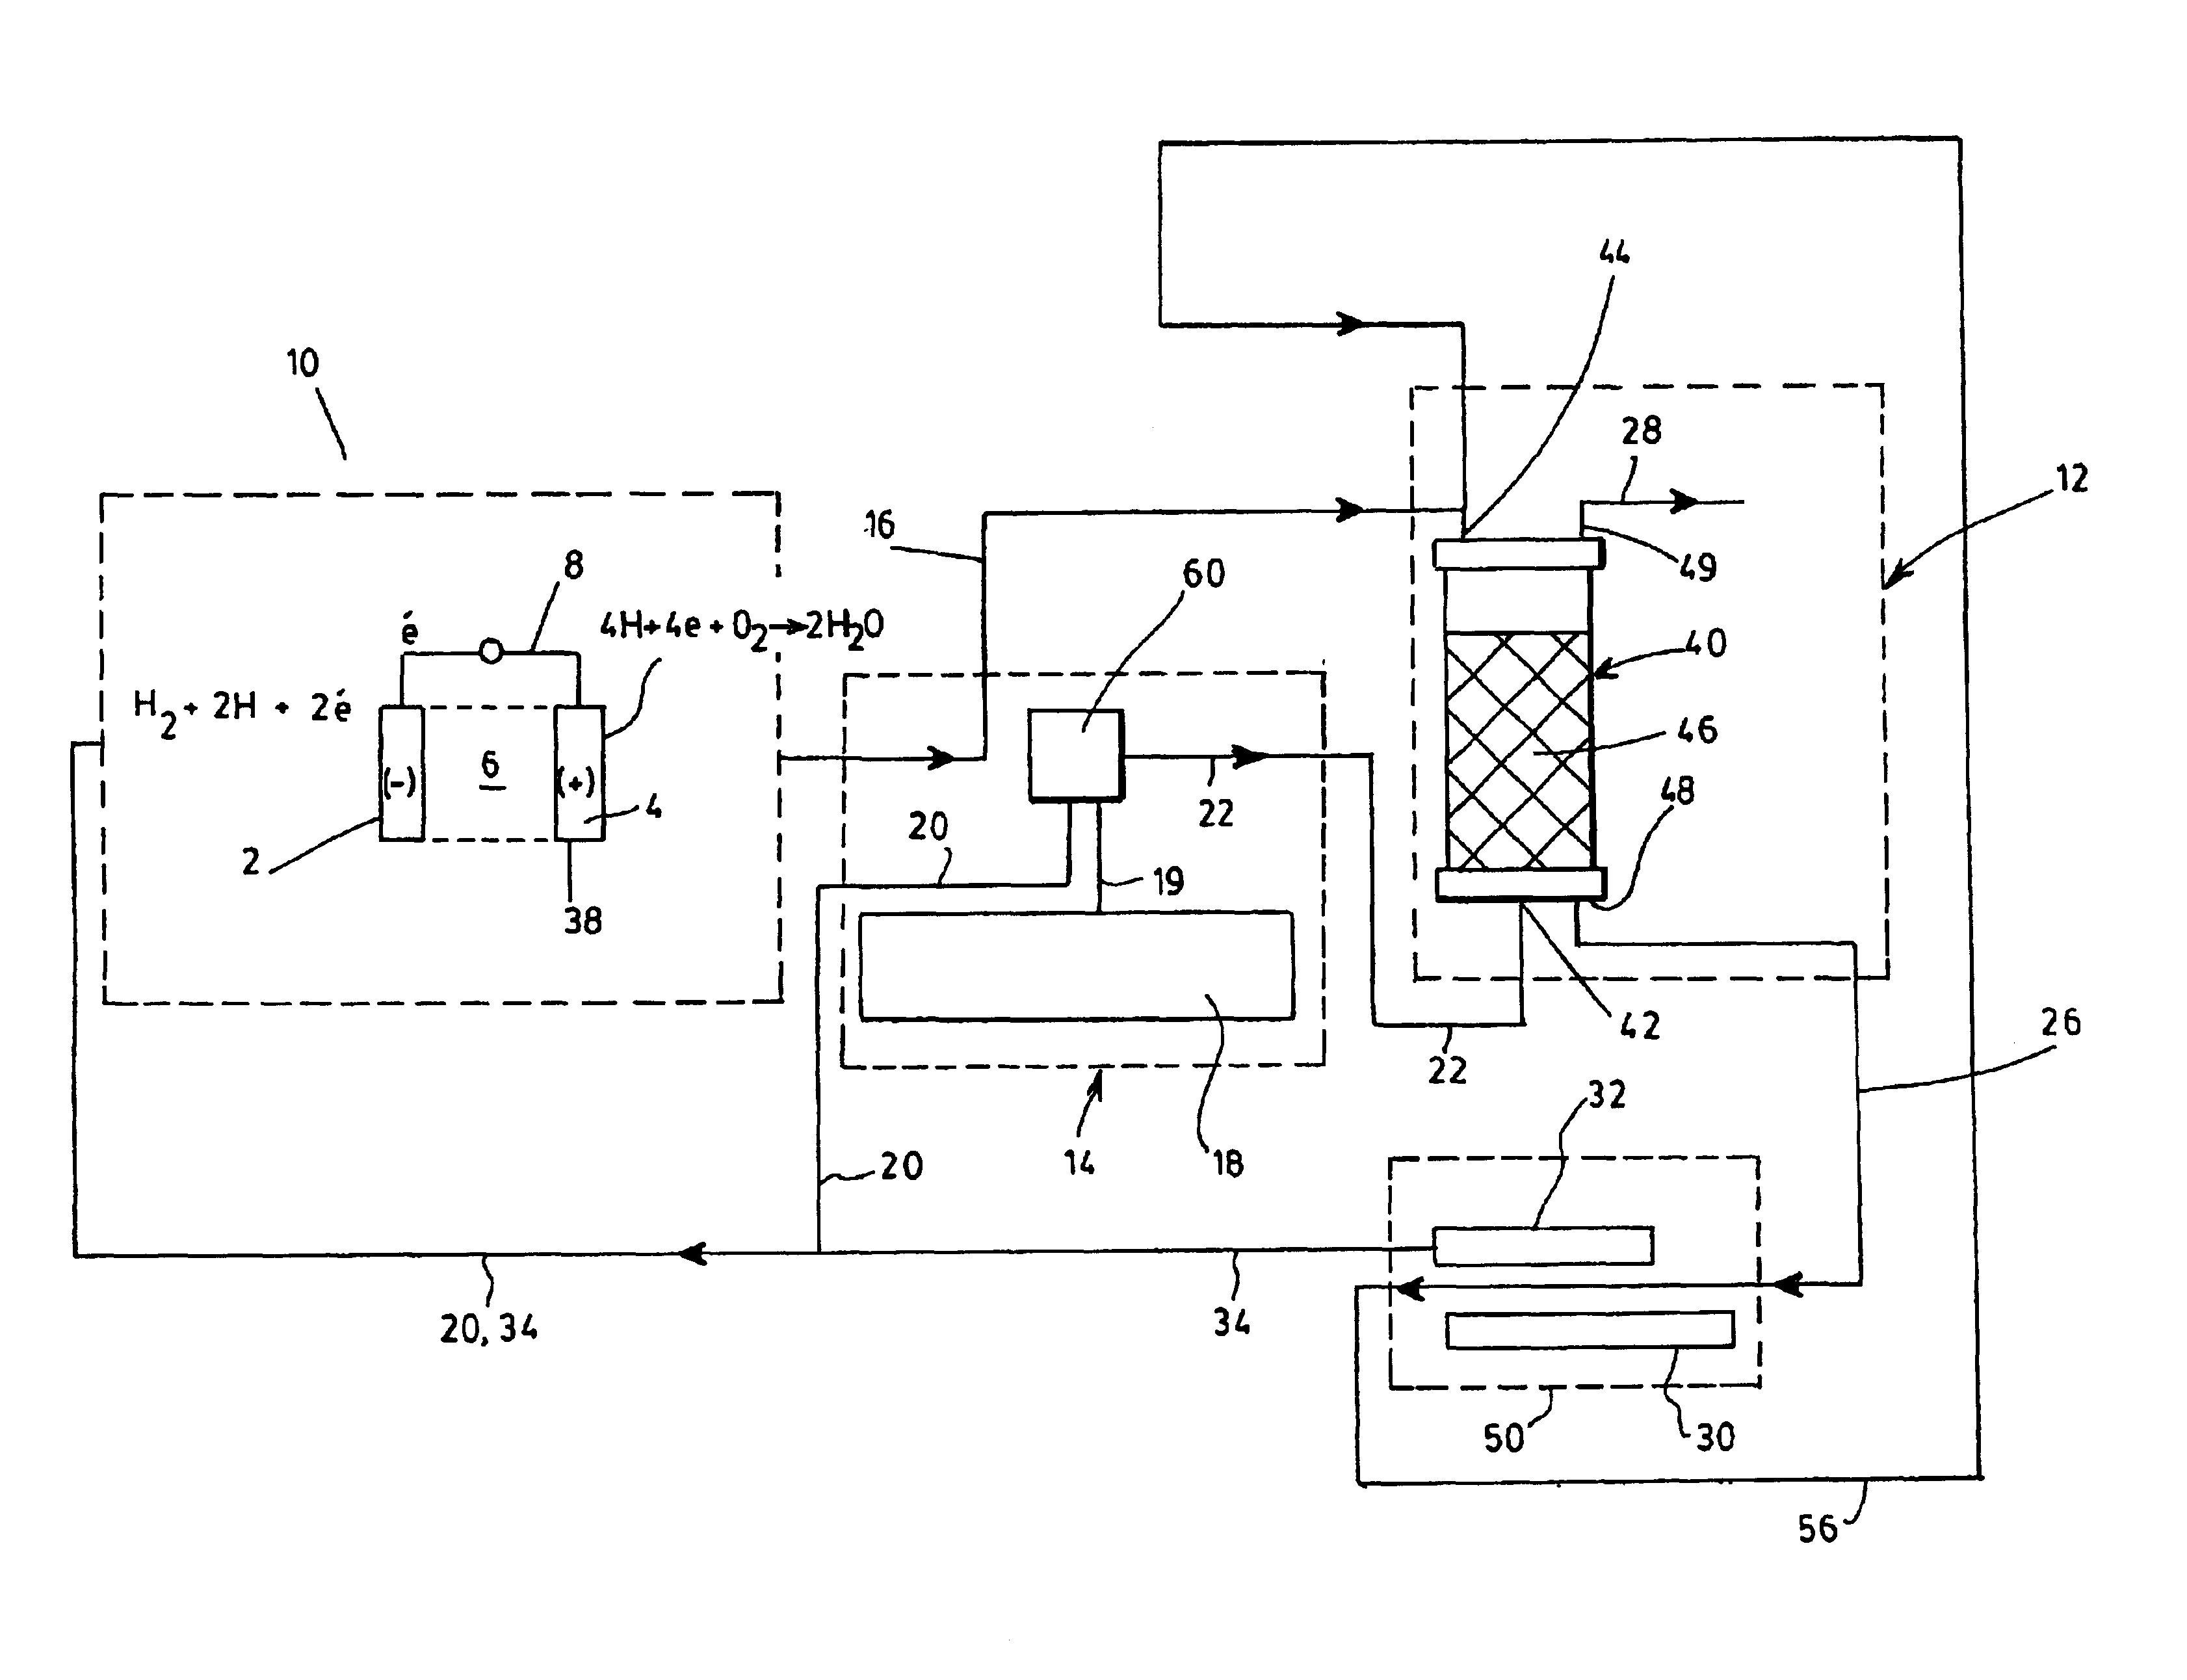 Process for generating electricity with a hydrogen fuel cell